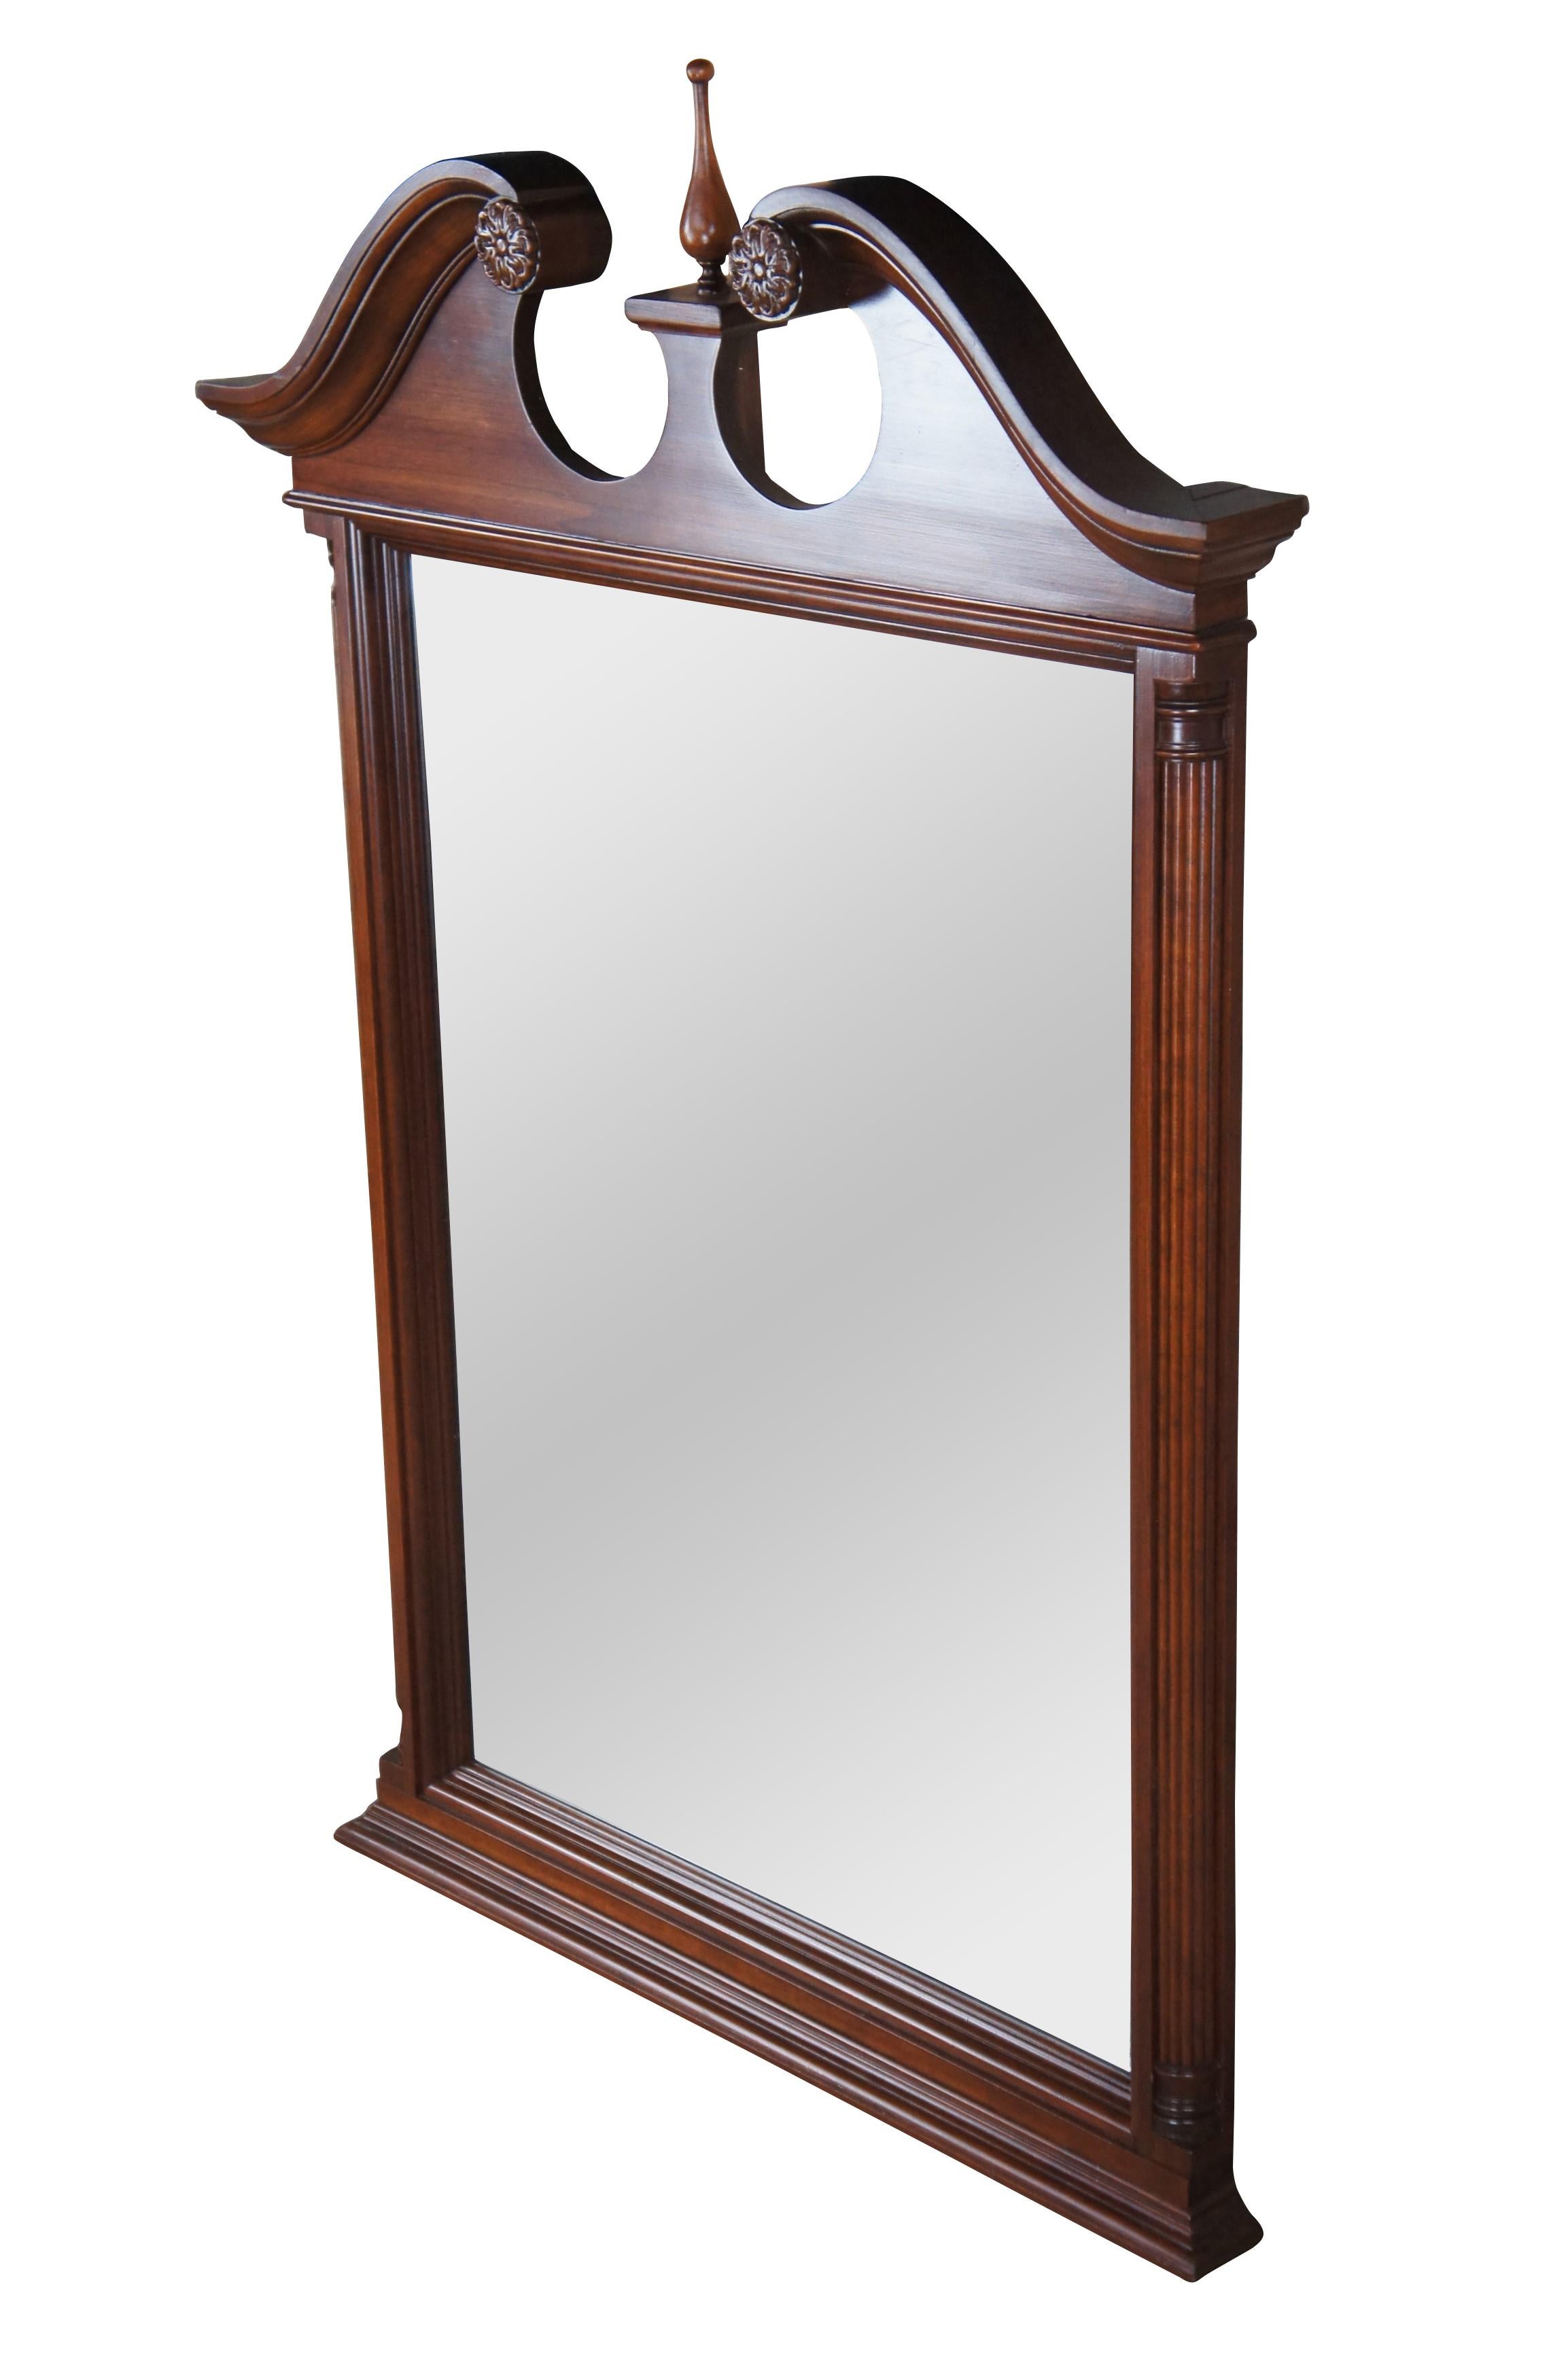 Late 20th Century Chippendale style over mantel or wall hanging mirror.  Made from cherry with an open pediment, spire shaped finial, beveled glass and quarter cut reeded columns along the side.  

Dimensions:
34.5